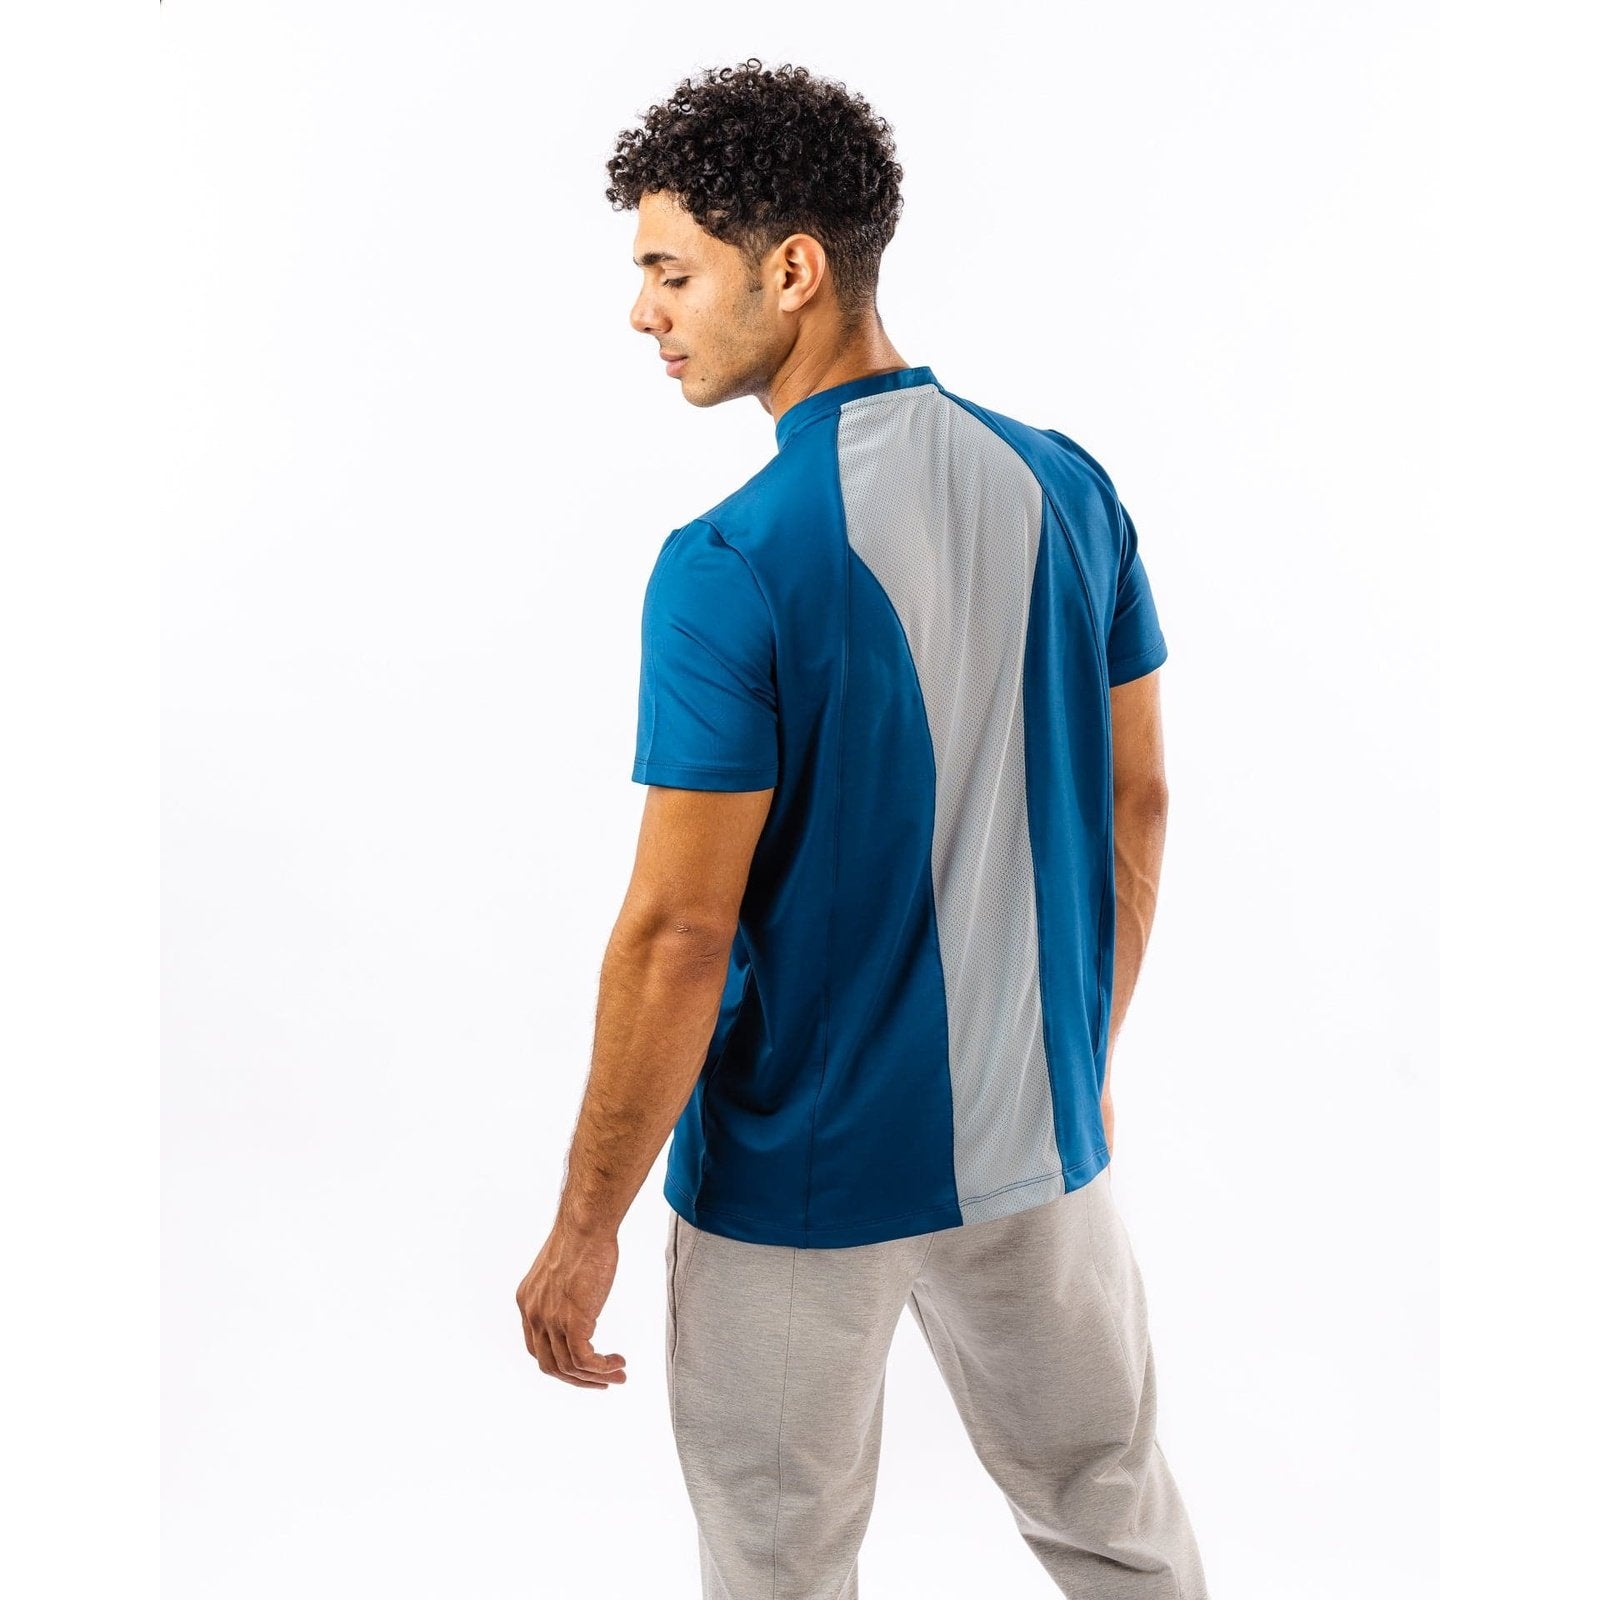 Marvel Training T-shirt in Teal - Sporty Pro